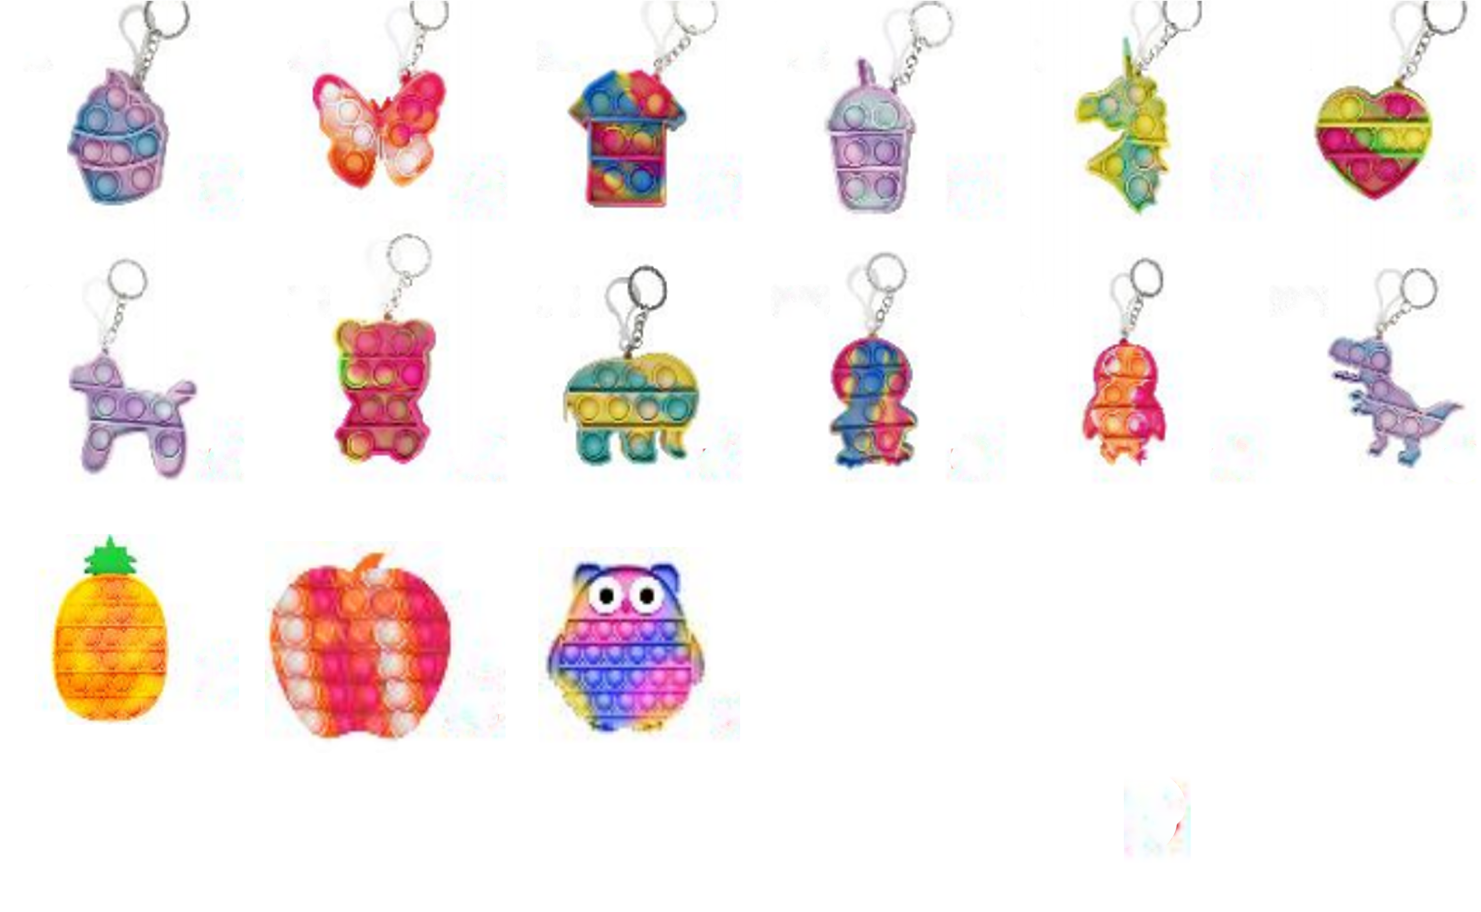 Peppermint Novelty Colorful Surprise 12-Pack: Assorted Pop-It Keychain Set for On-The-Go Fun!